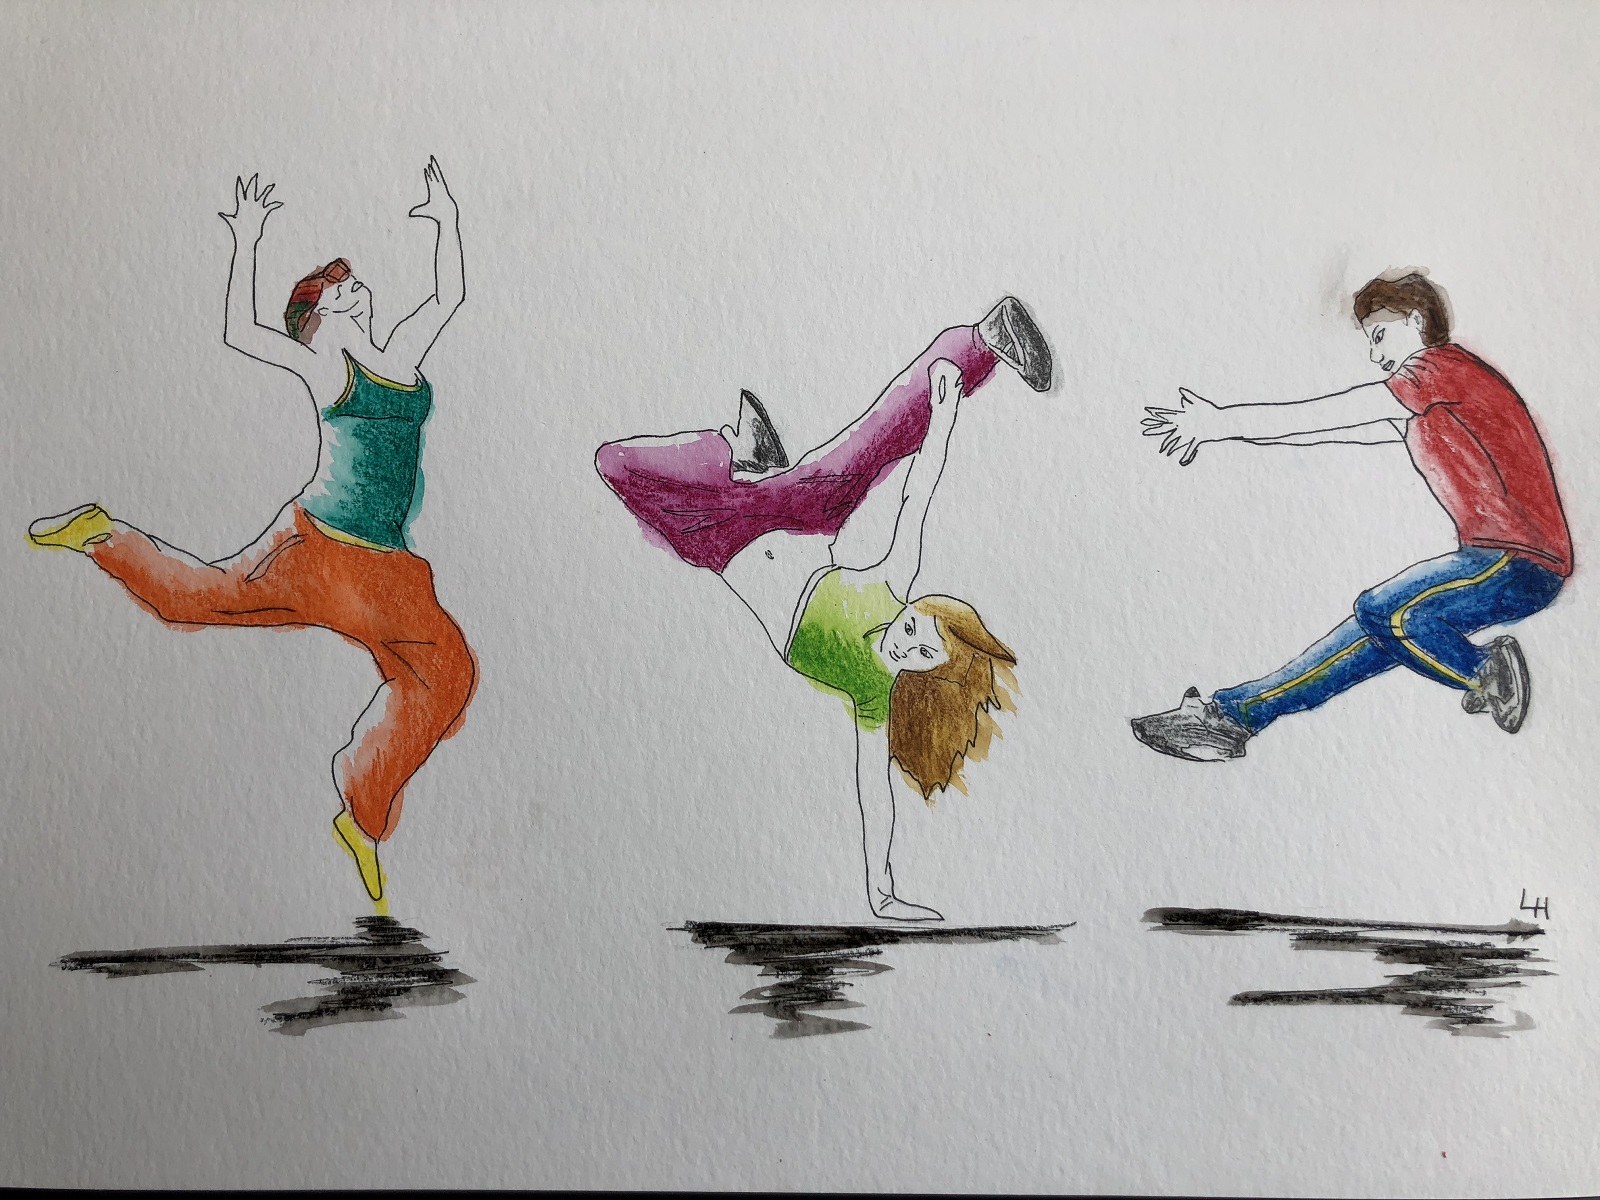 Street dancers on paper with markers, 30 x 40 cm